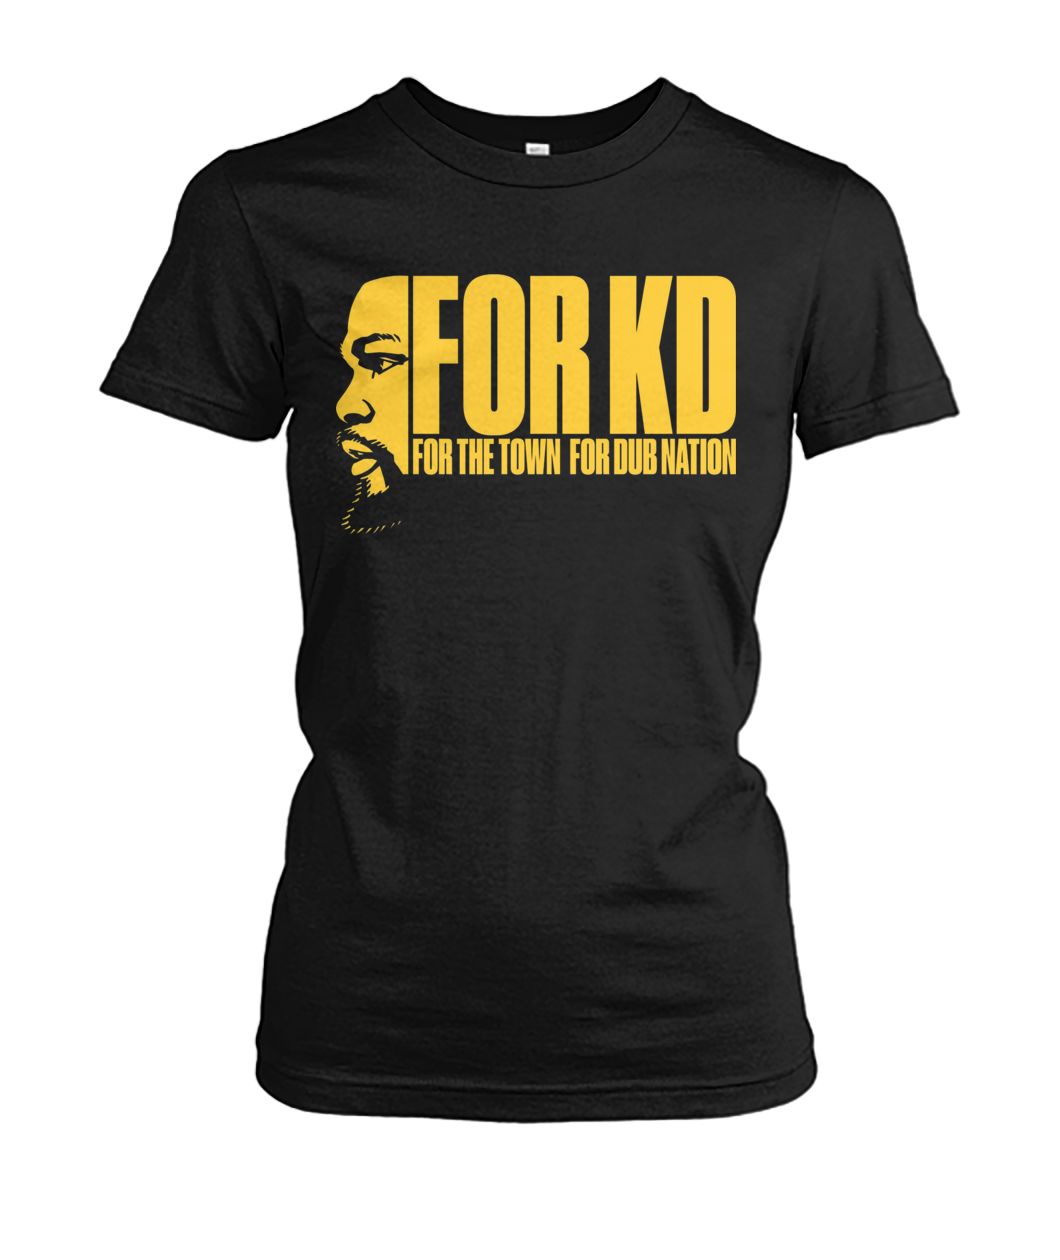 For KD for the town for dub nation women's crew tee